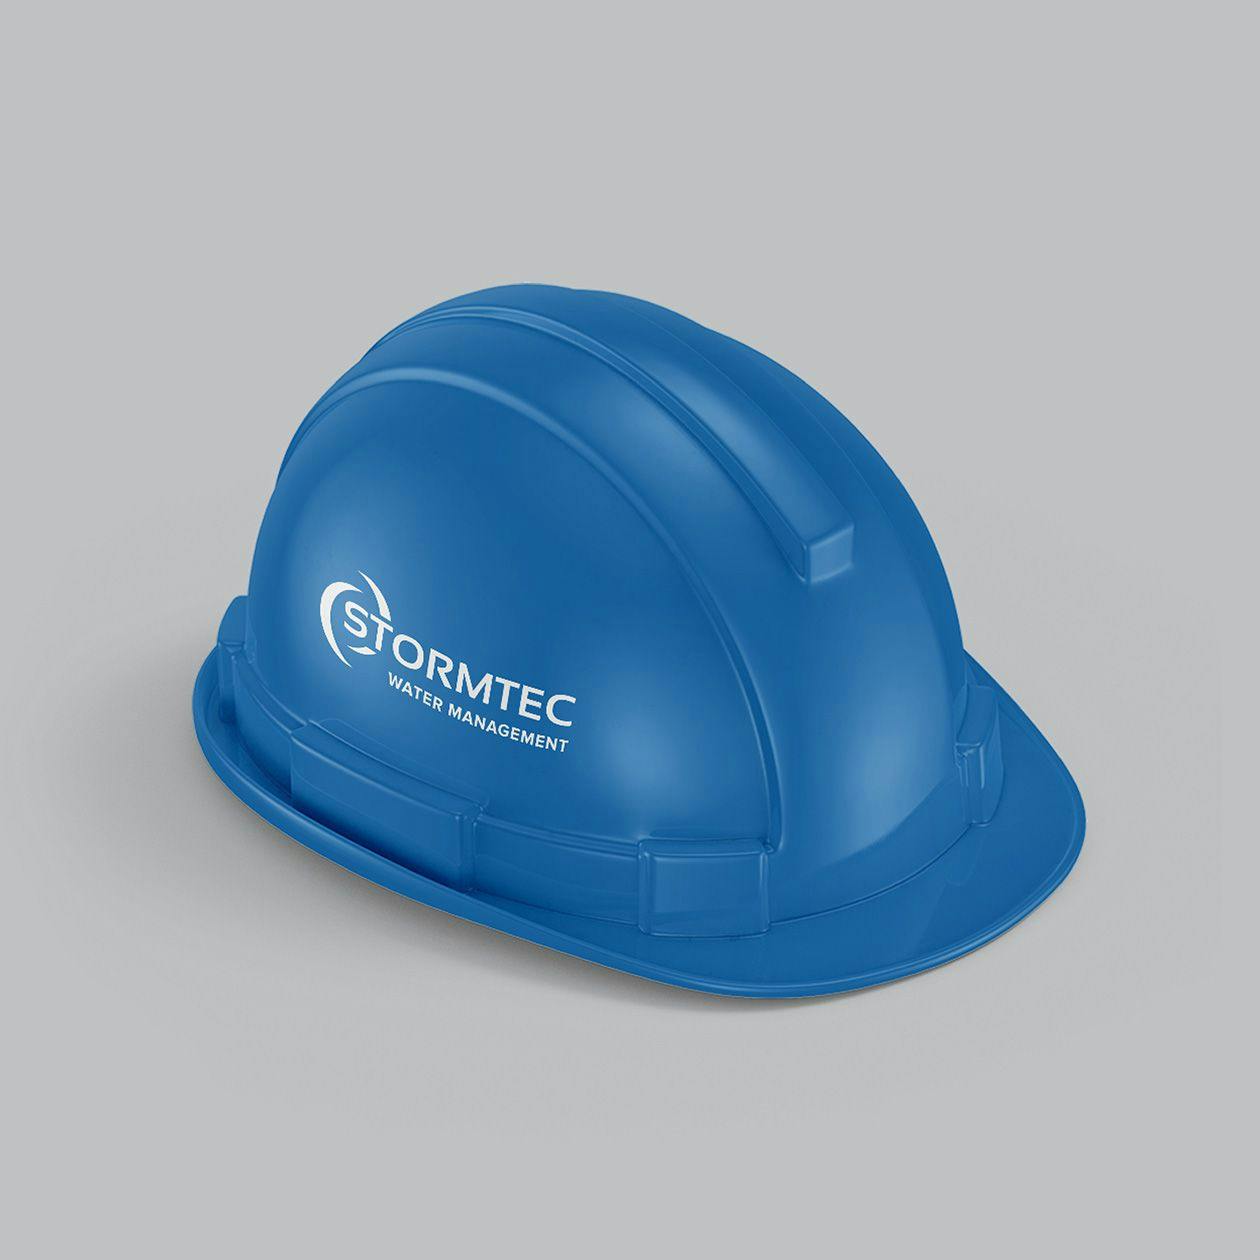 A hardhat with the Stormtec logo